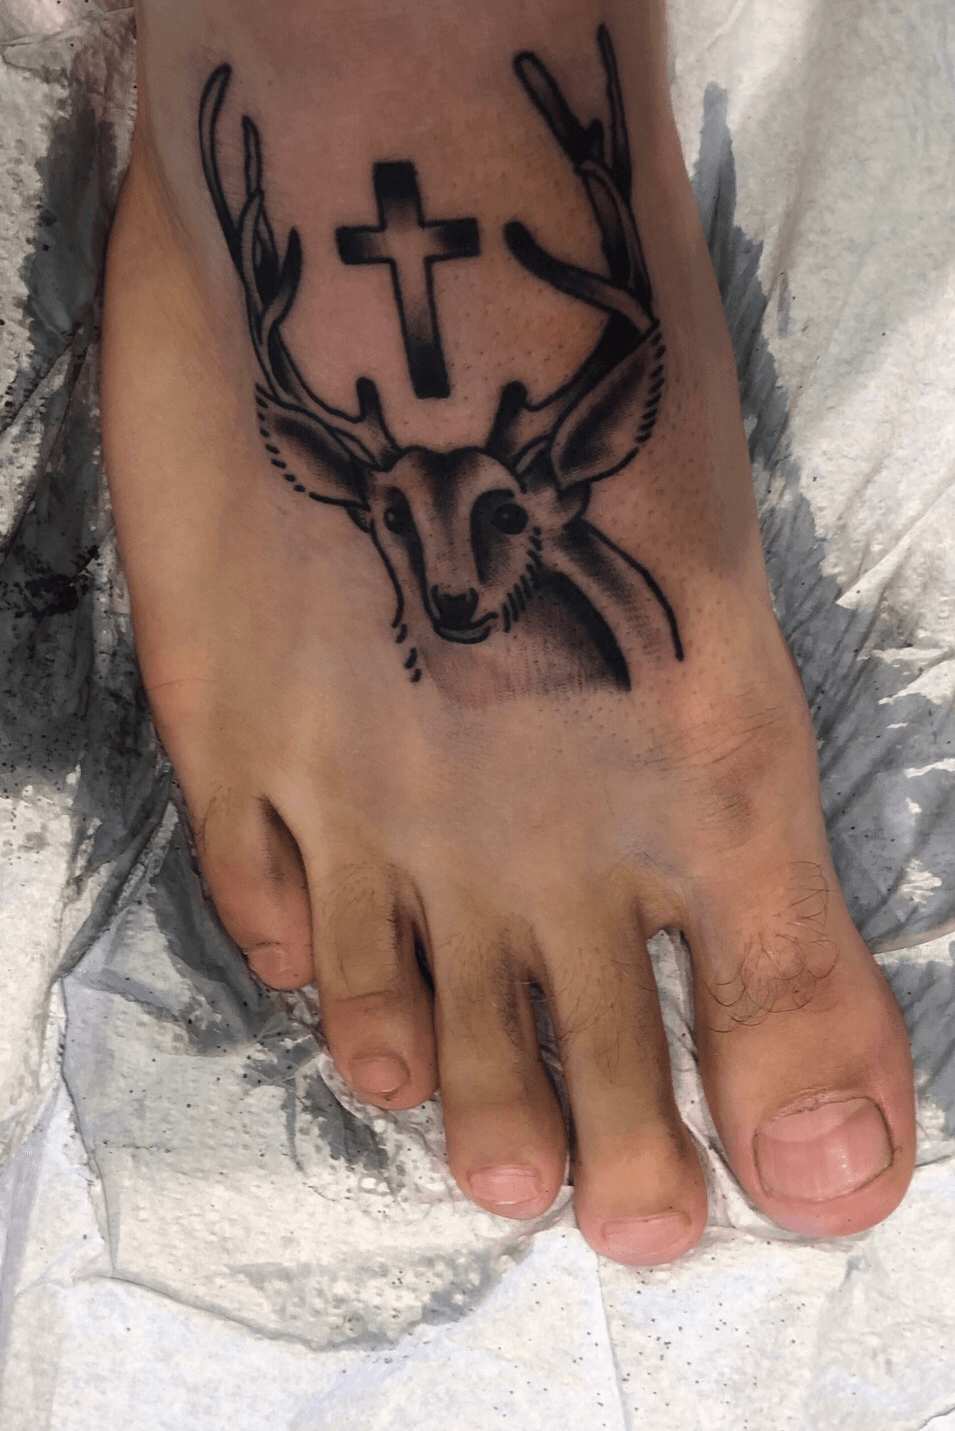 Baratheon inspired Stag 2 weeks healed By John Knox at Bright Ideas  Tattooing in Murfreesboro TN  rtattoos